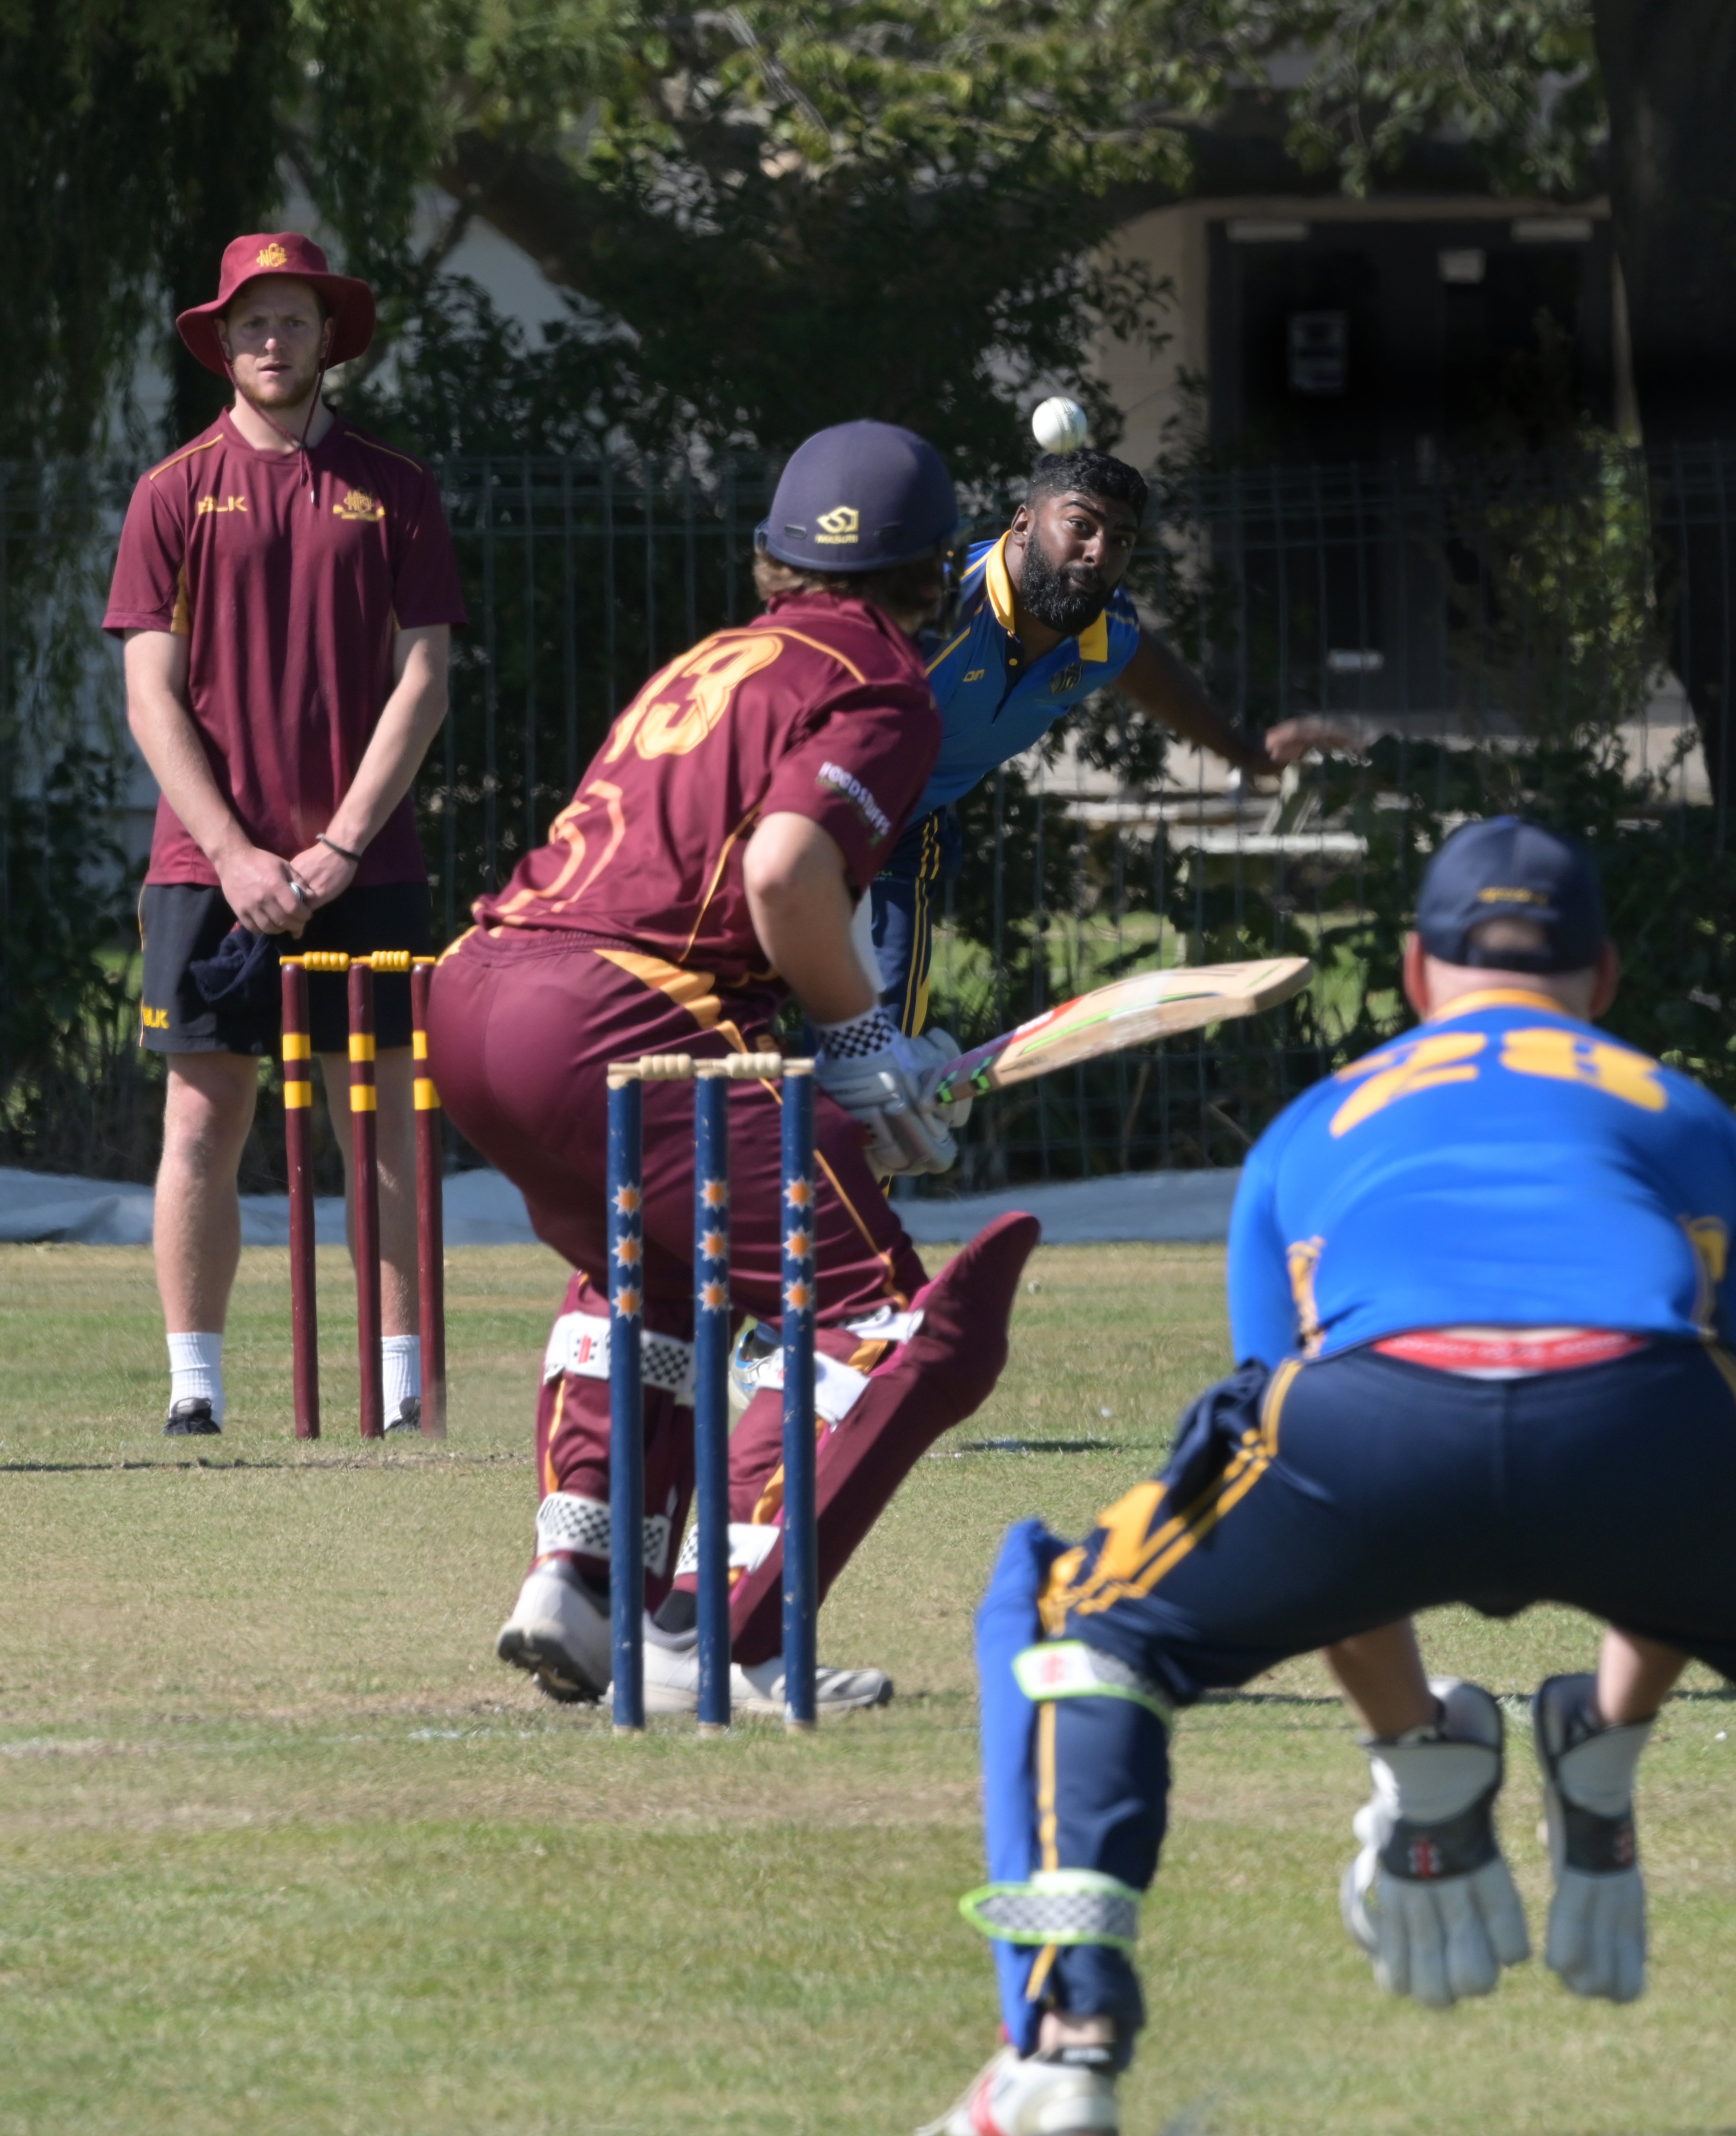 North East Valley batsman Llew Johnson prepares to play a delivery from University-Grange bowler...